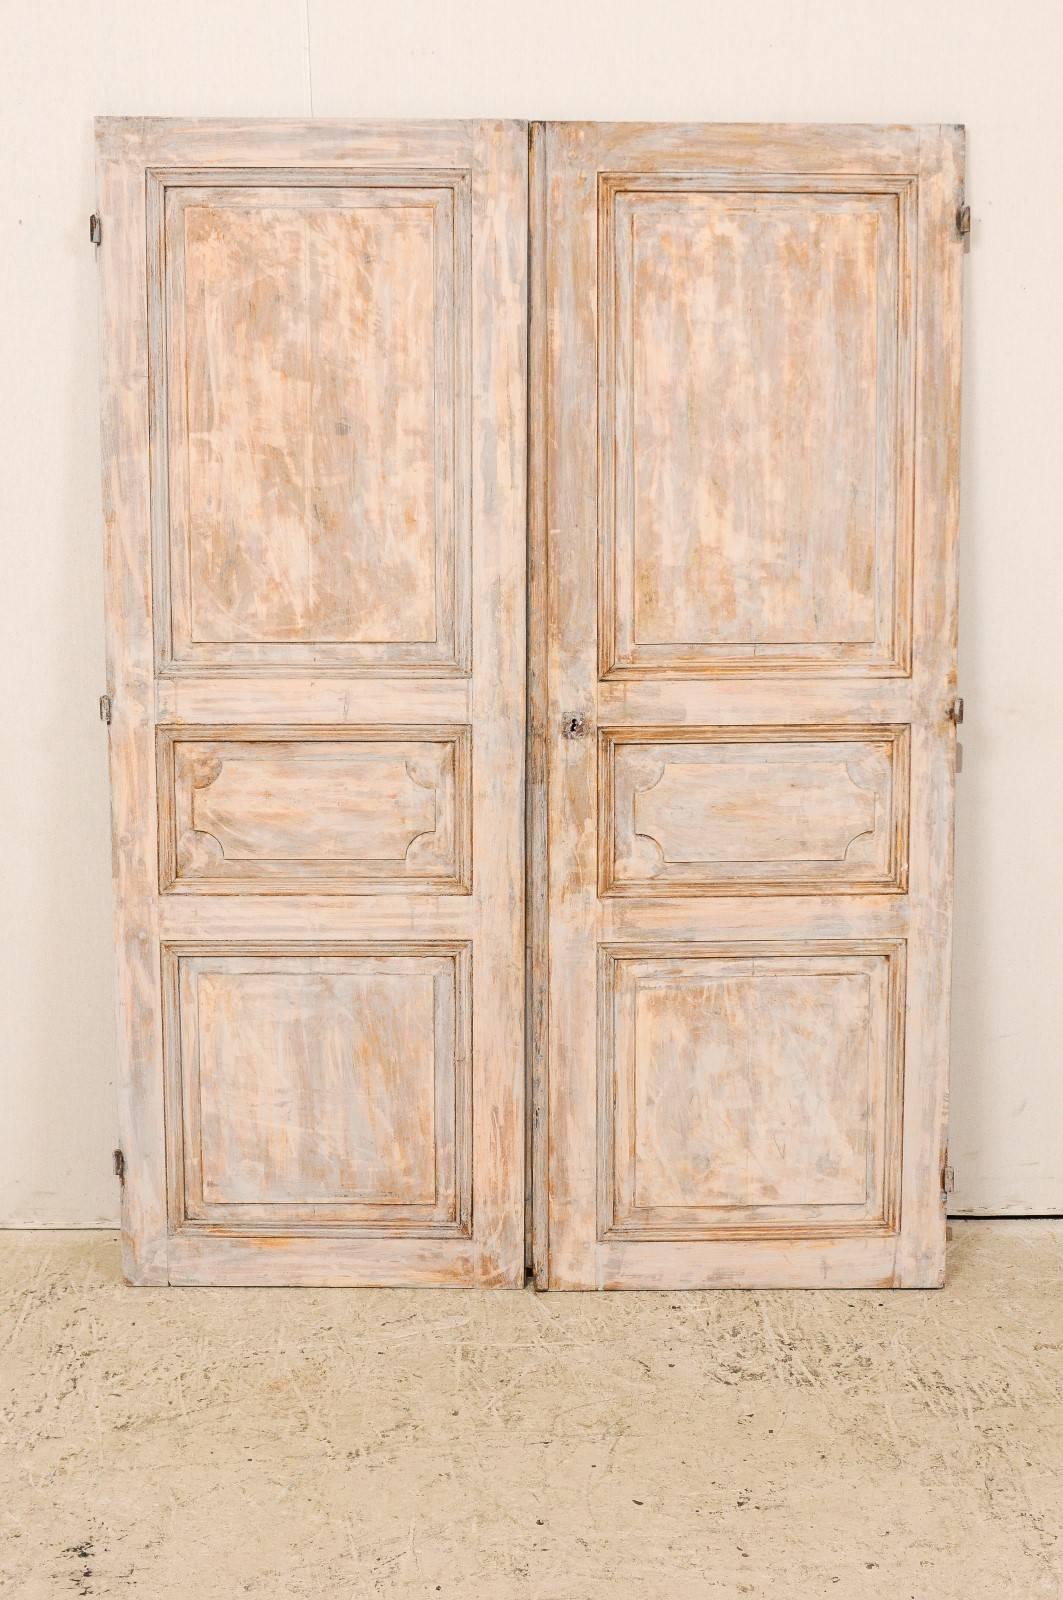 Pair of European 19th French style doors. This pair of cute sized French style doors, from the 19th century have a blue or grey color with taupe accents and wood showing throughout. Each door has three raised panels that breaks up the surface and